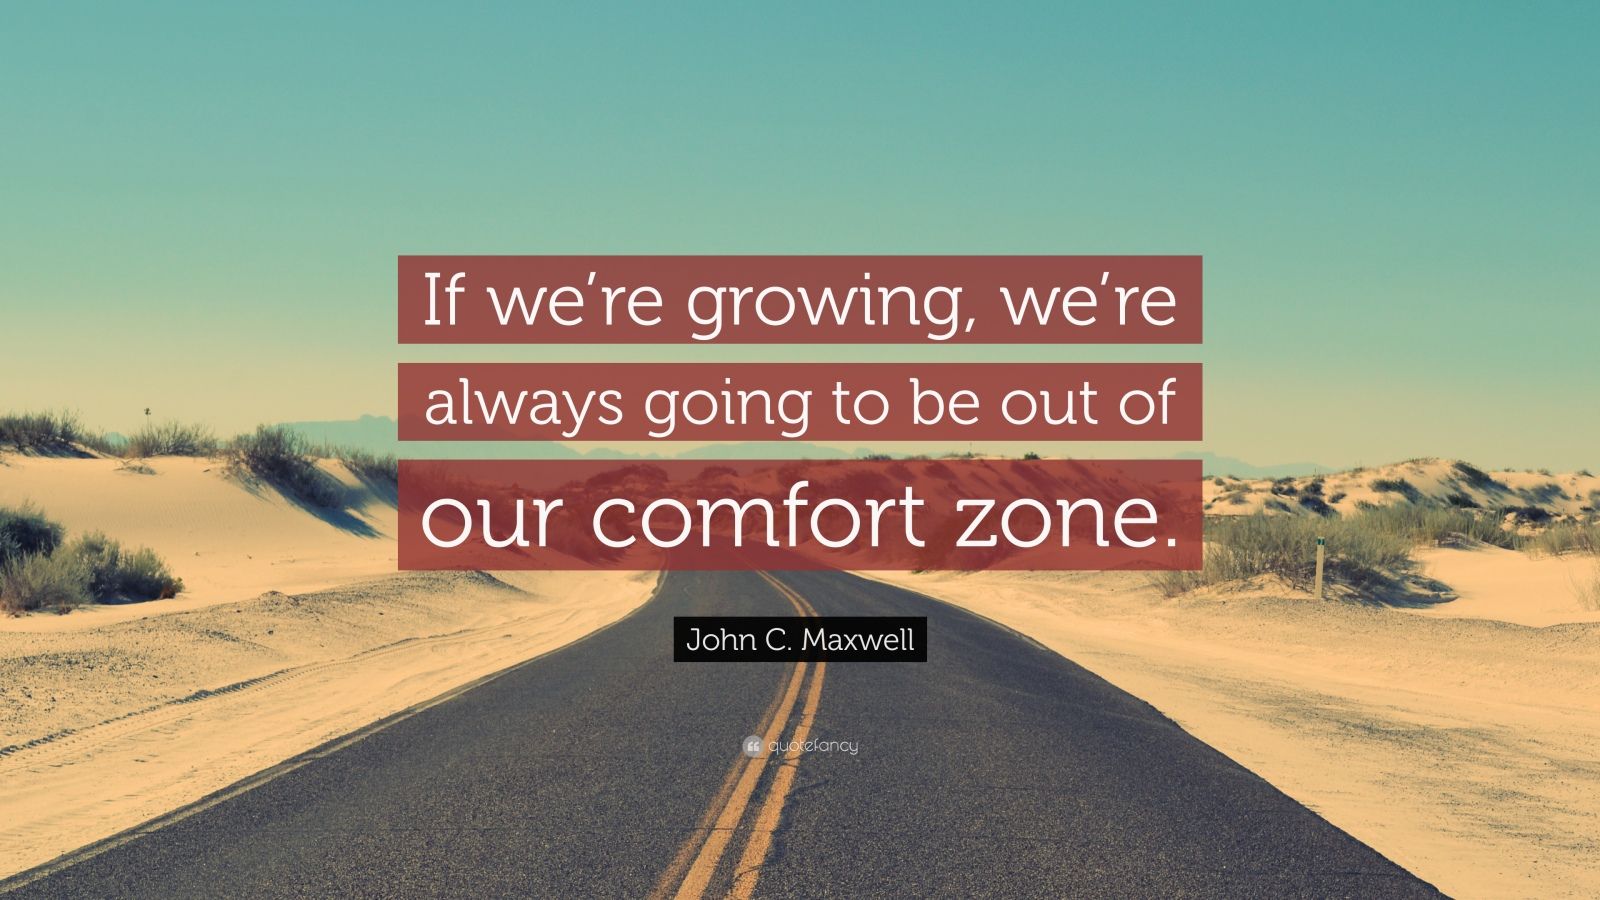 John C. Maxwell Quote: “If we’re growing, we’re always going to be out